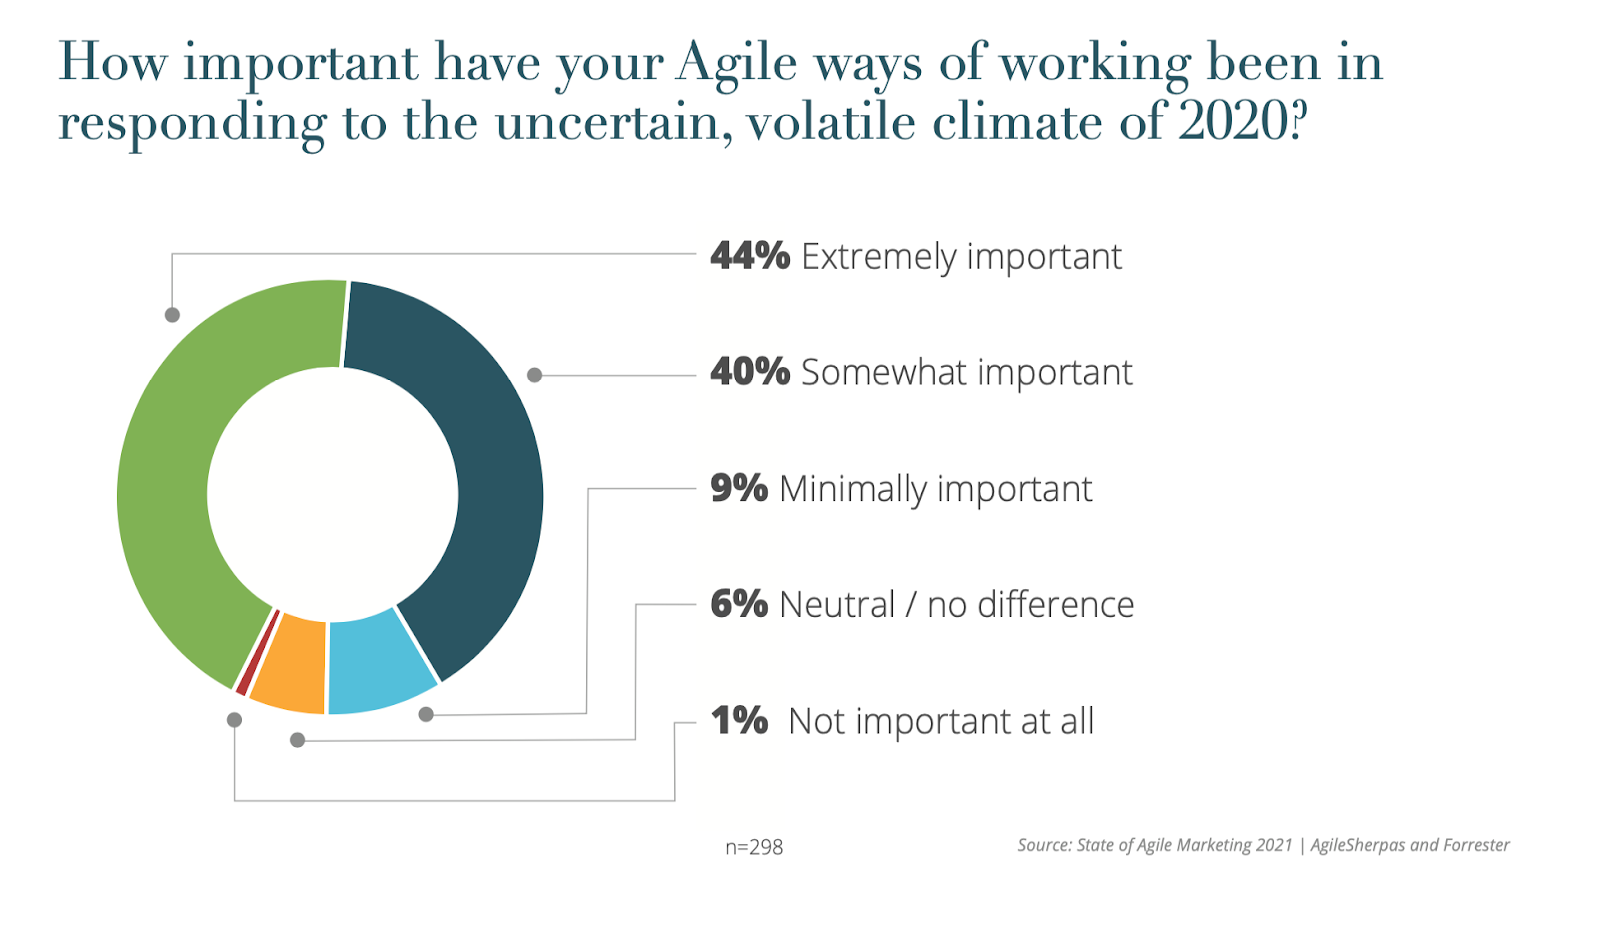 The importance of Agile in responding to uncertain, volatile marketing climate in 2020